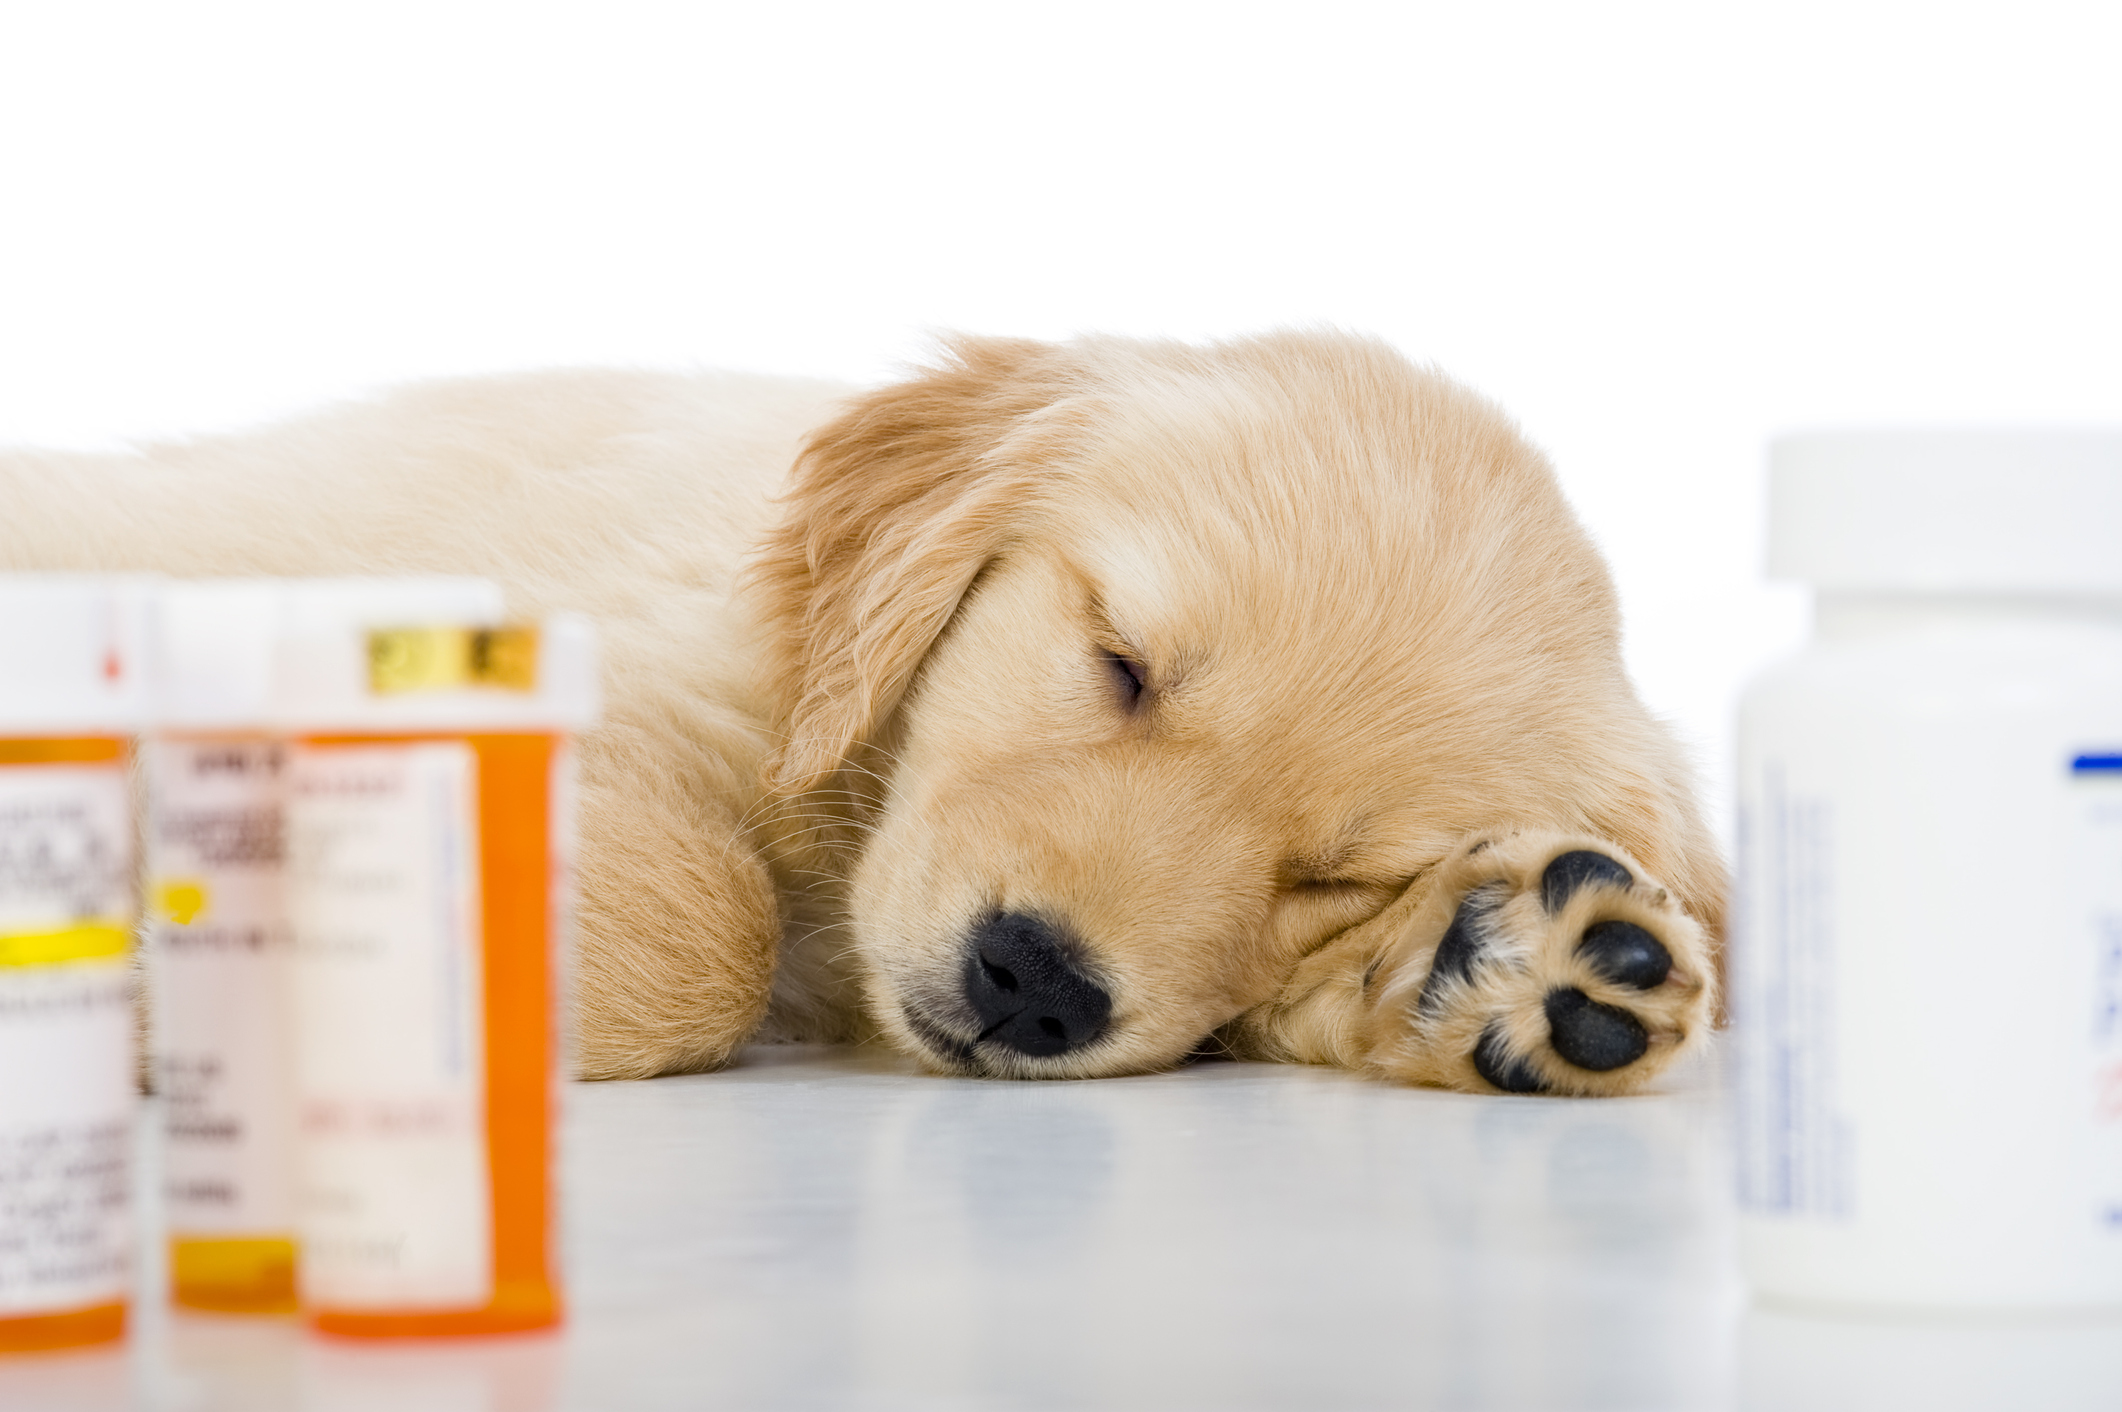 A sick golden retriever puppy rests on a veterinarian's examining table